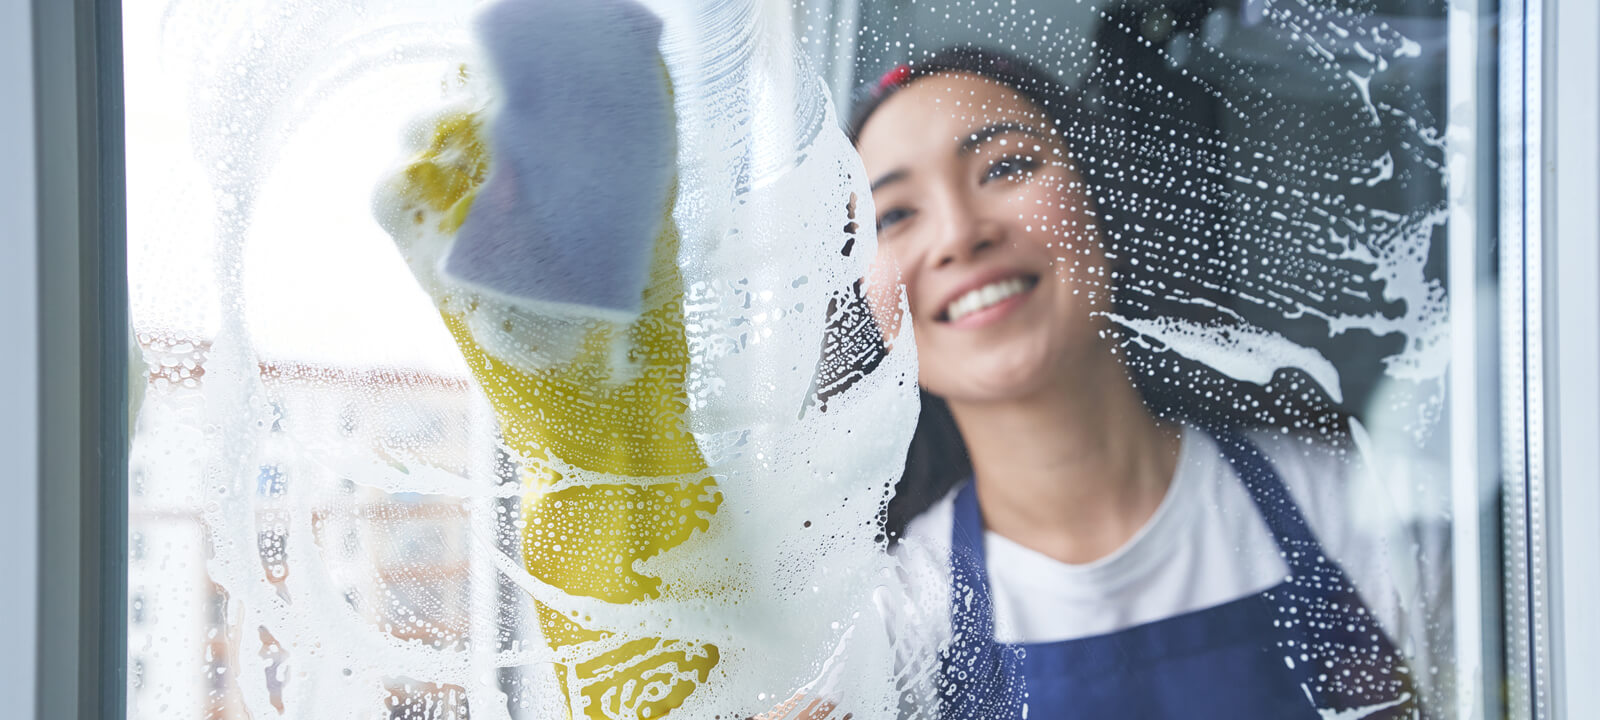 Best Cleaning Service. Cheerful Young Woman Smiling While Cleaning The Window, Glass Surface Using Sponge